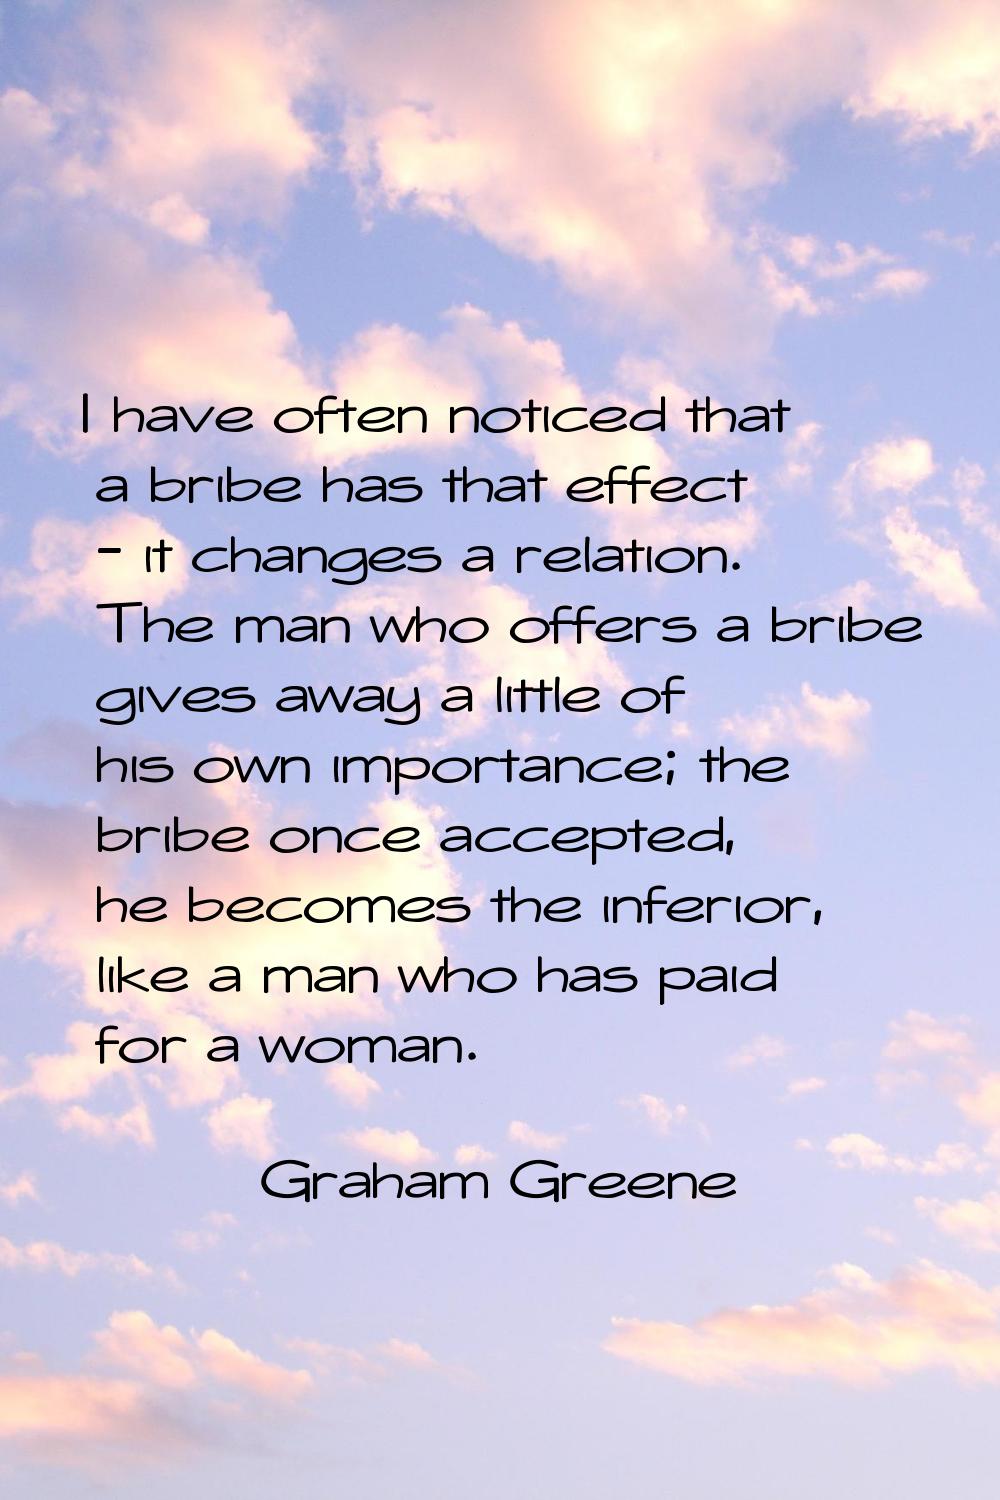 I have often noticed that a bribe has that effect - it changes a relation. The man who offers a bri